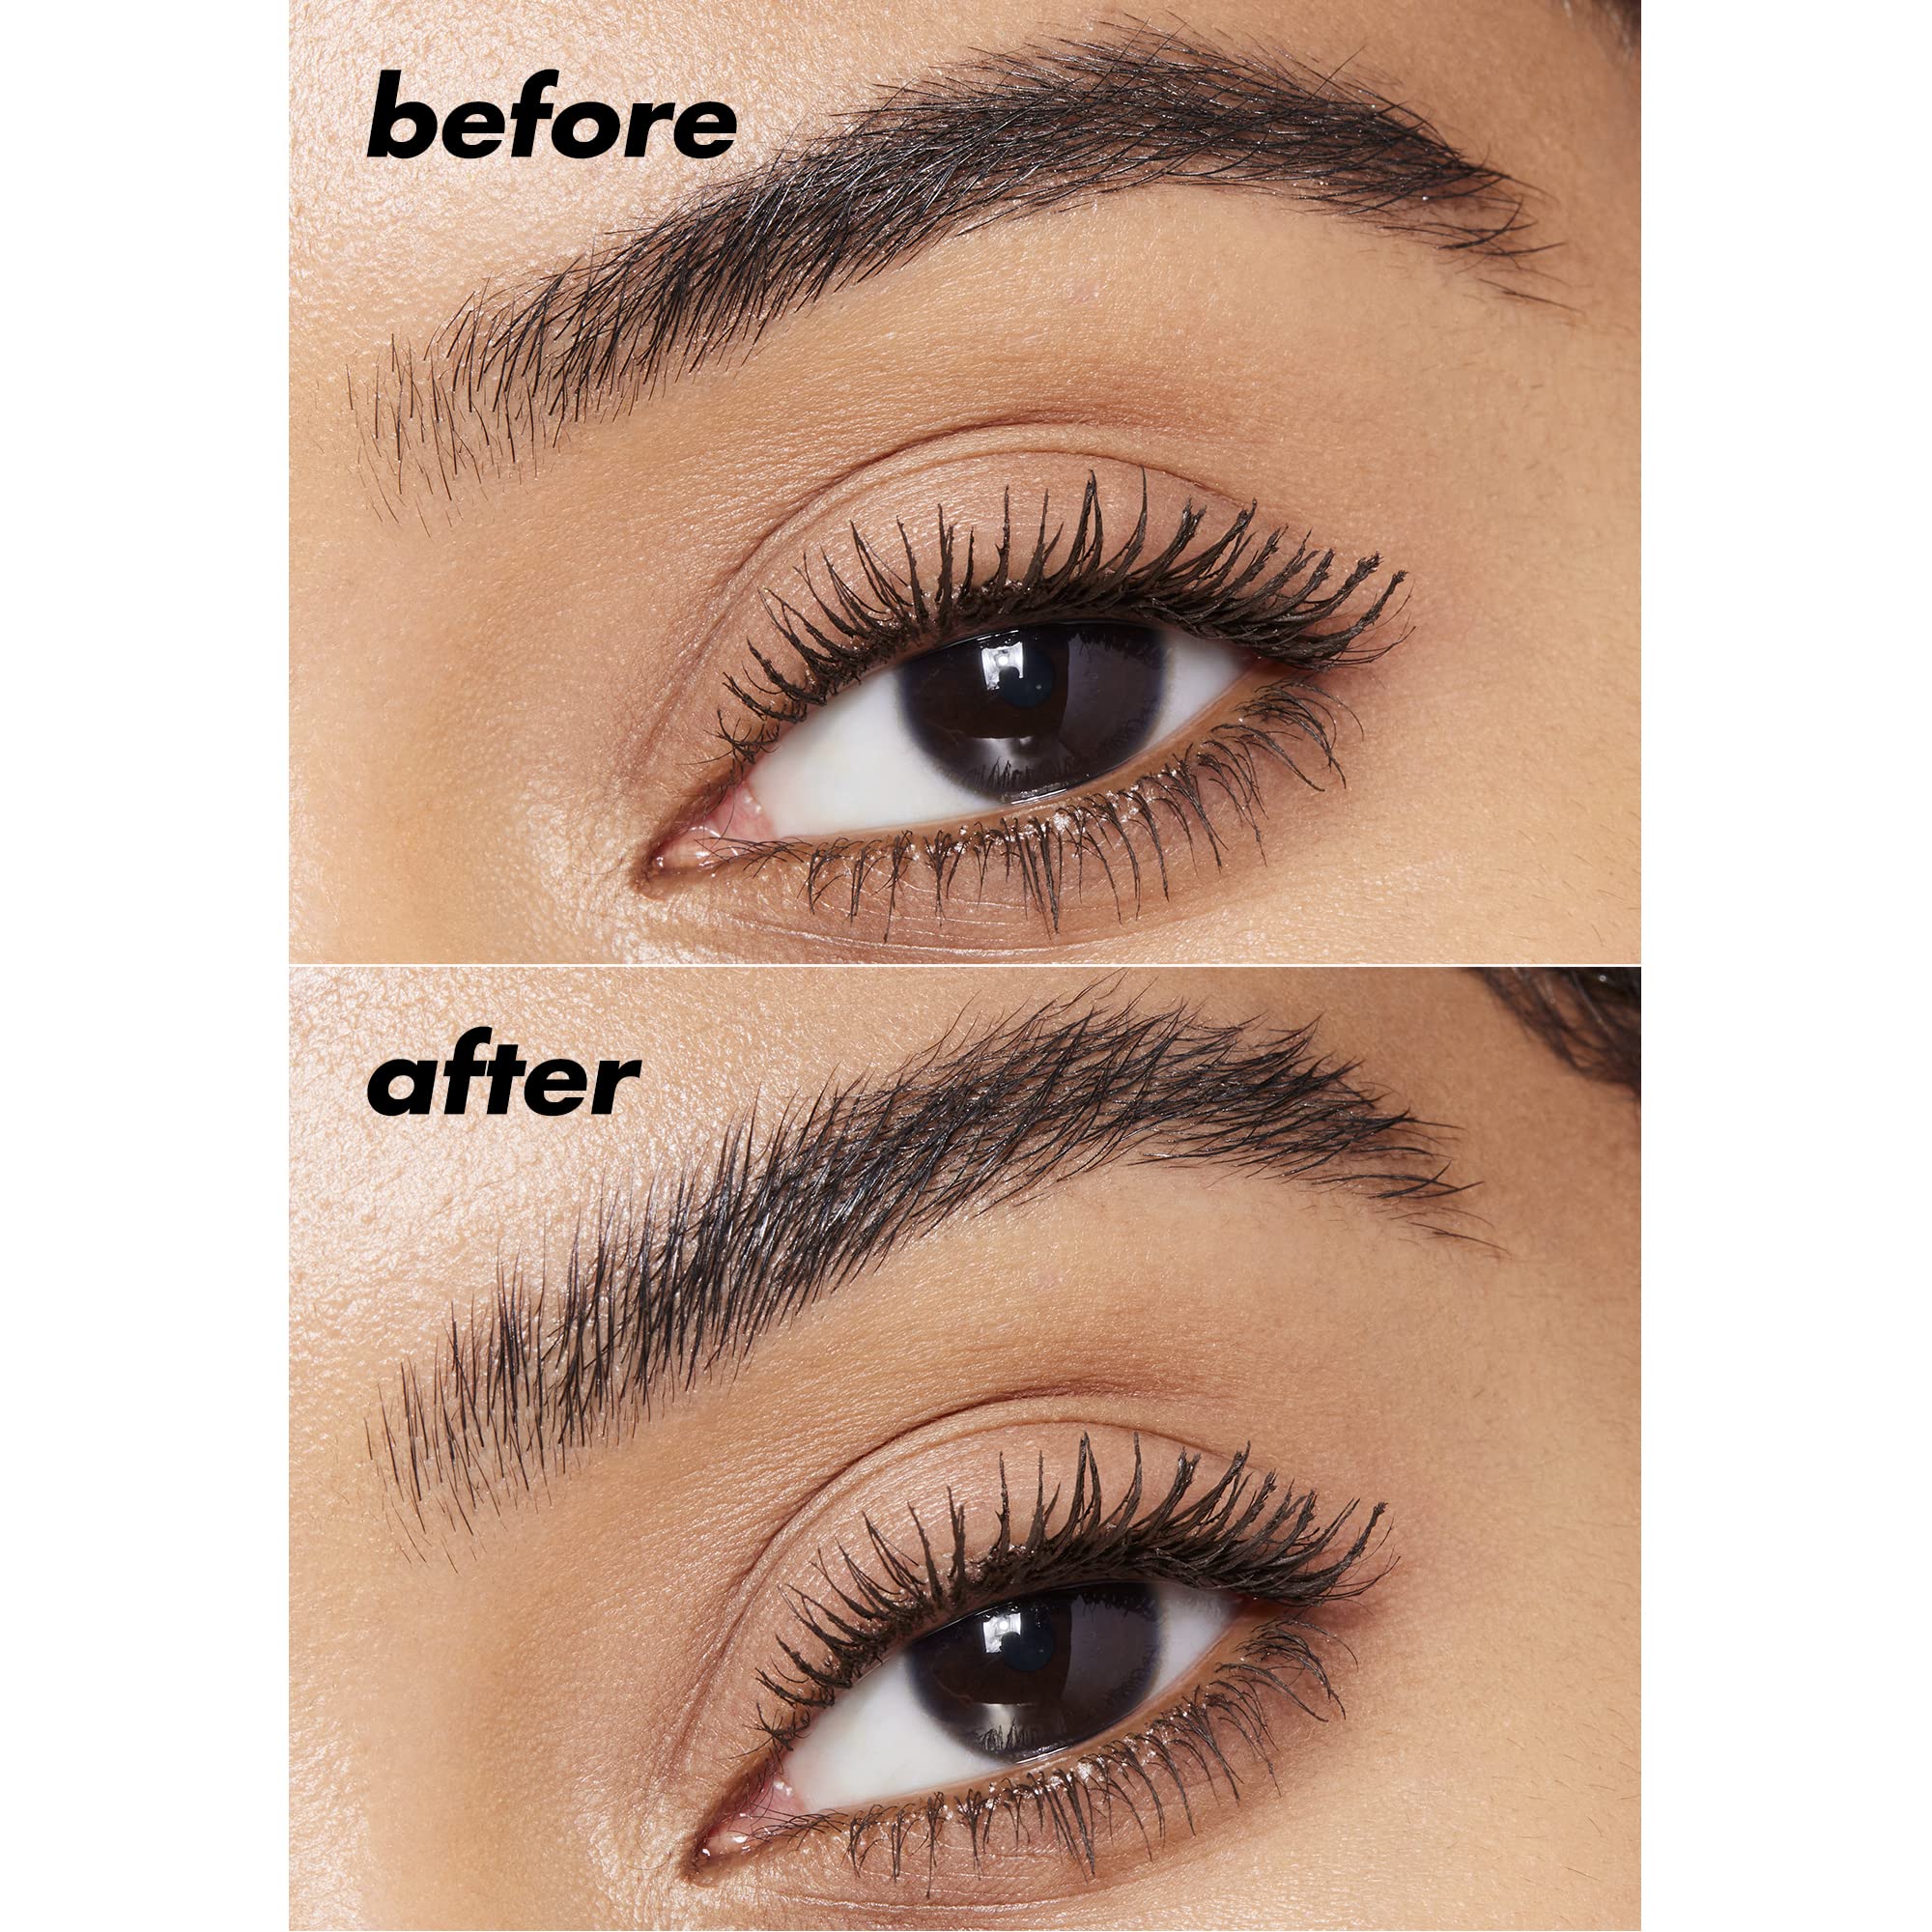 e.l.f. Cosmetics Brow Lift, Clear Eyebrow Shaping Wax For Holding Brows In Place, Creates A Fluffy Feathered Look